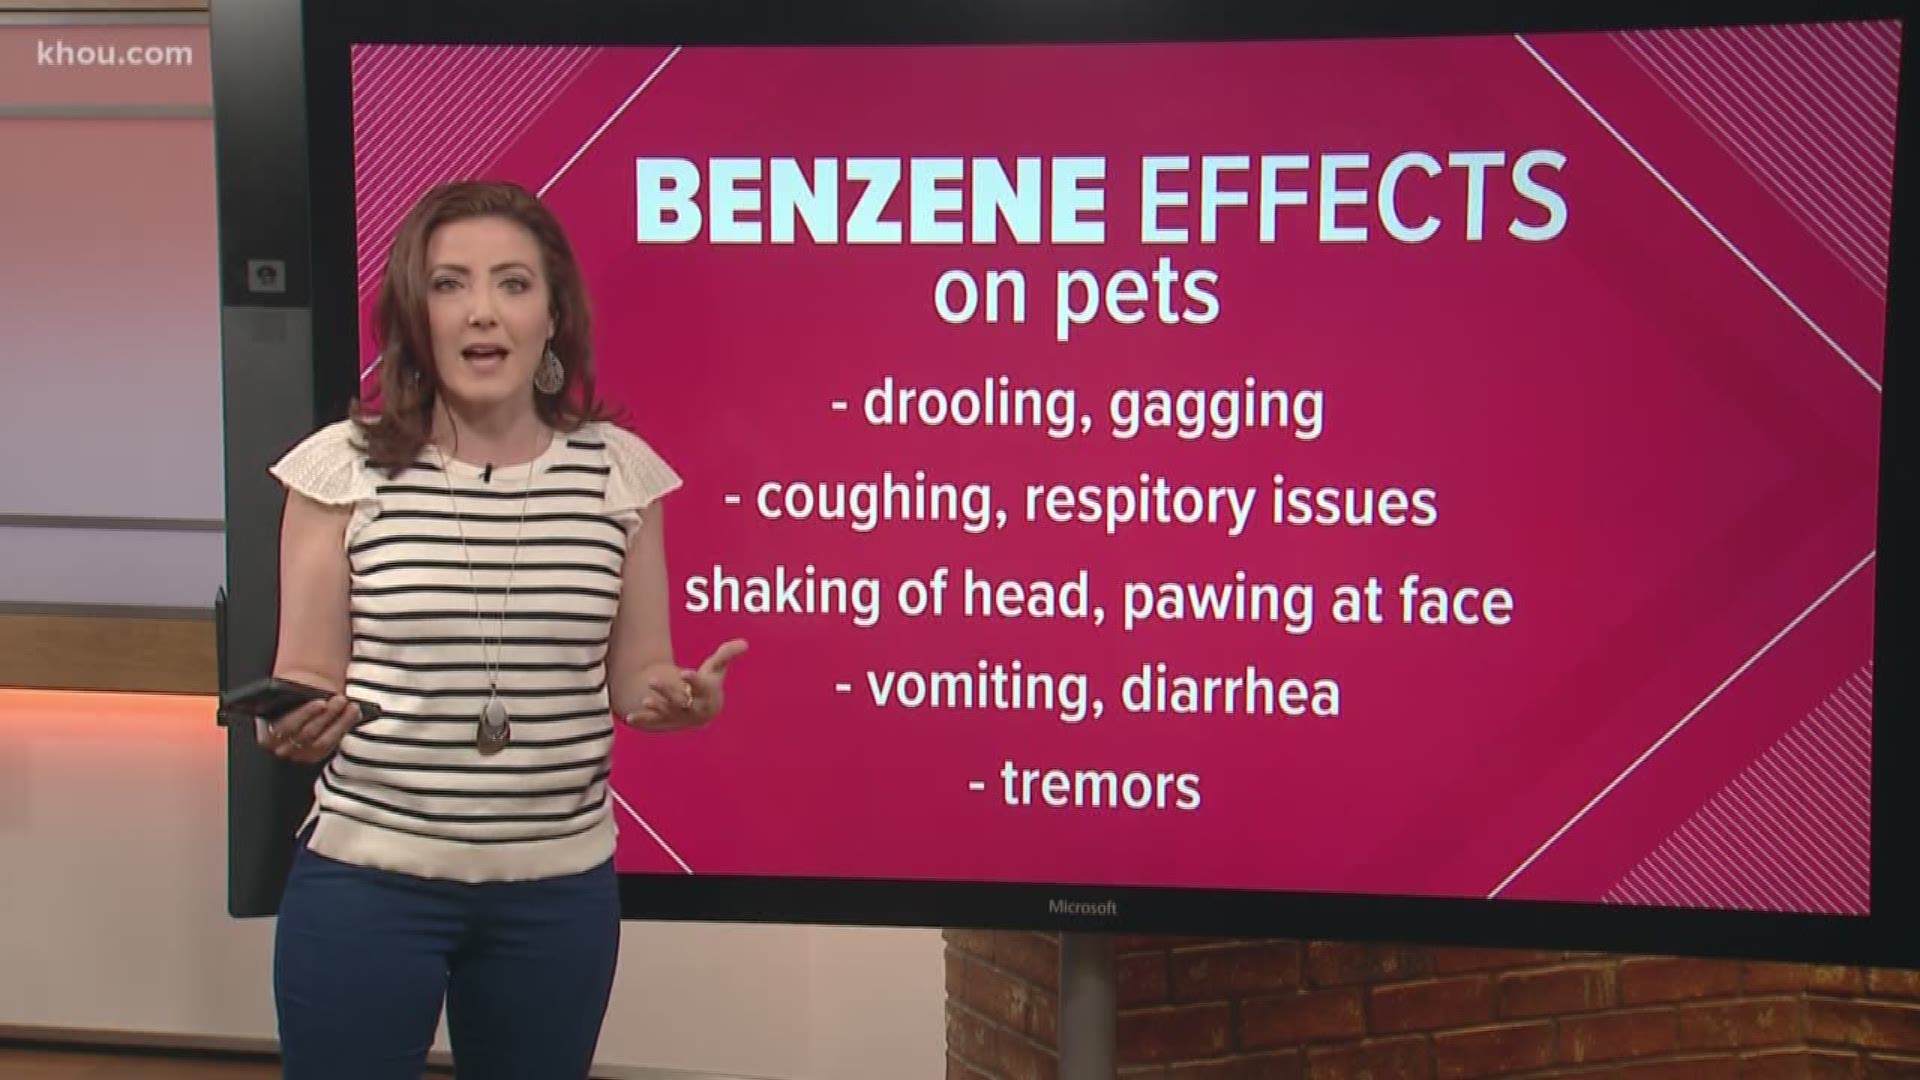 A shelter-in-place is in effect in the Deer Park area due to action-levels of Benzene. Brandi Smith has more on what symptoms to look for.